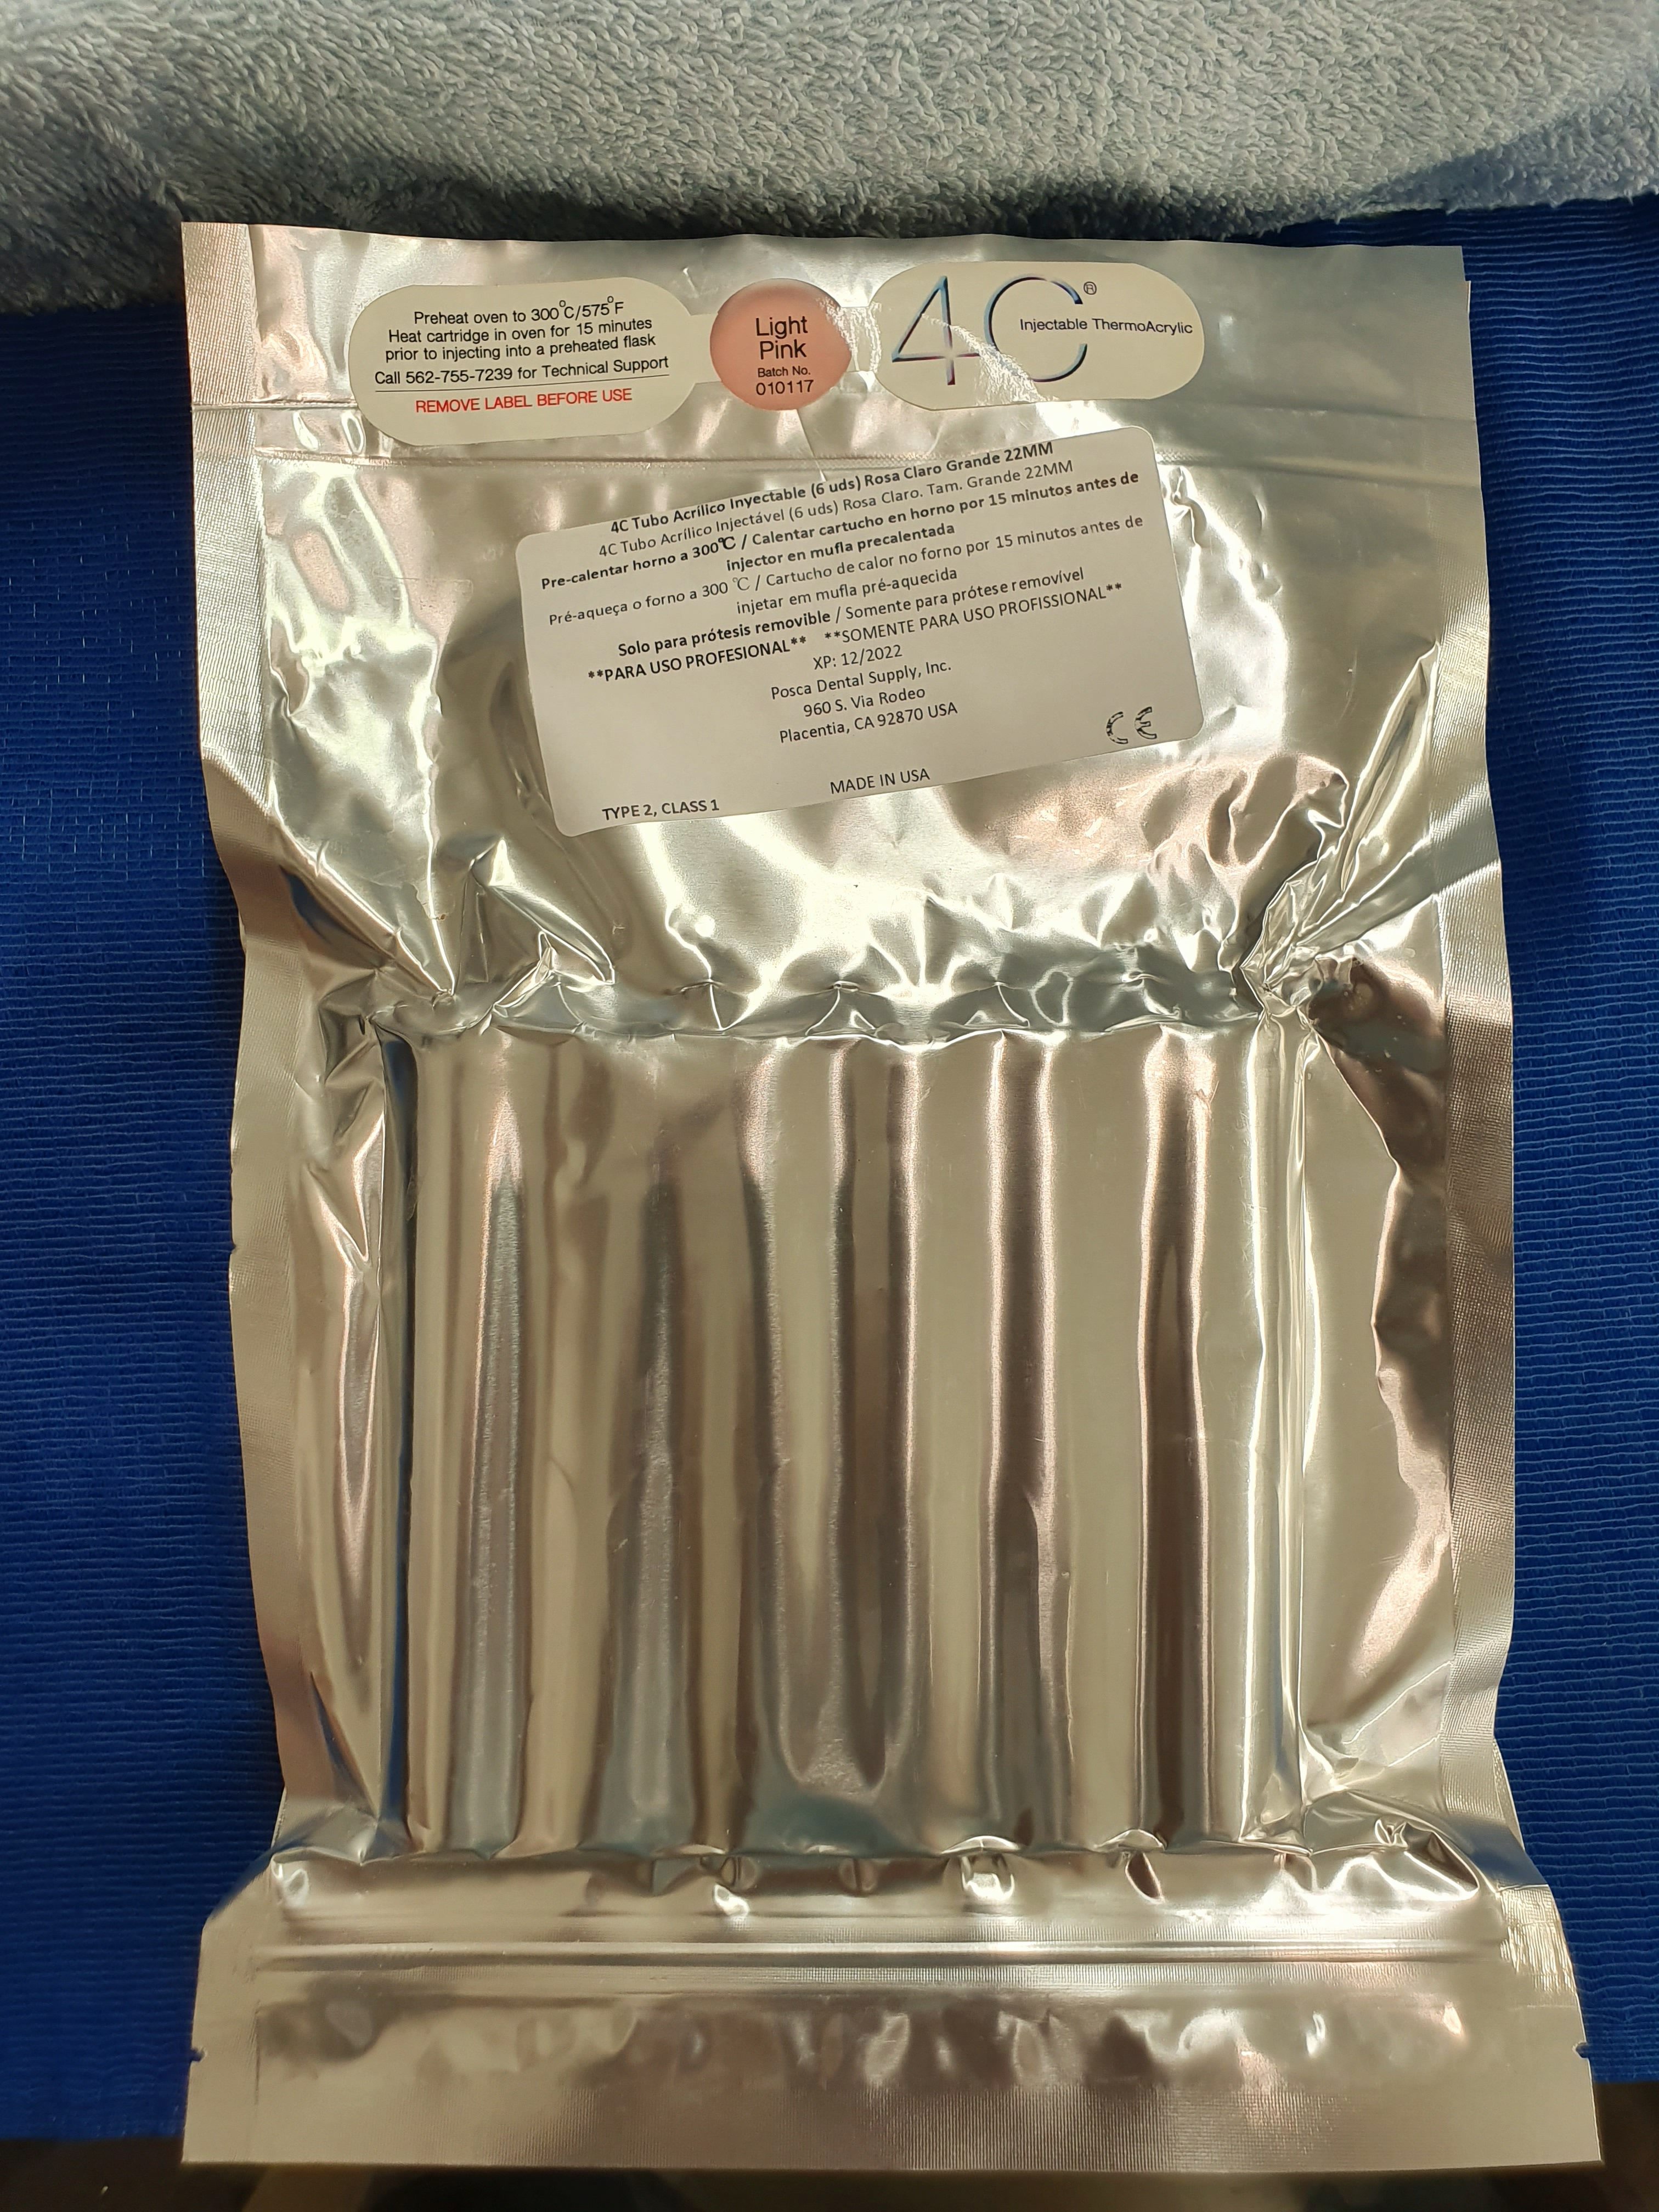 4C INJECTABLE THERMOACRYLIC Ǿ 22 ; 25 MM LARGE